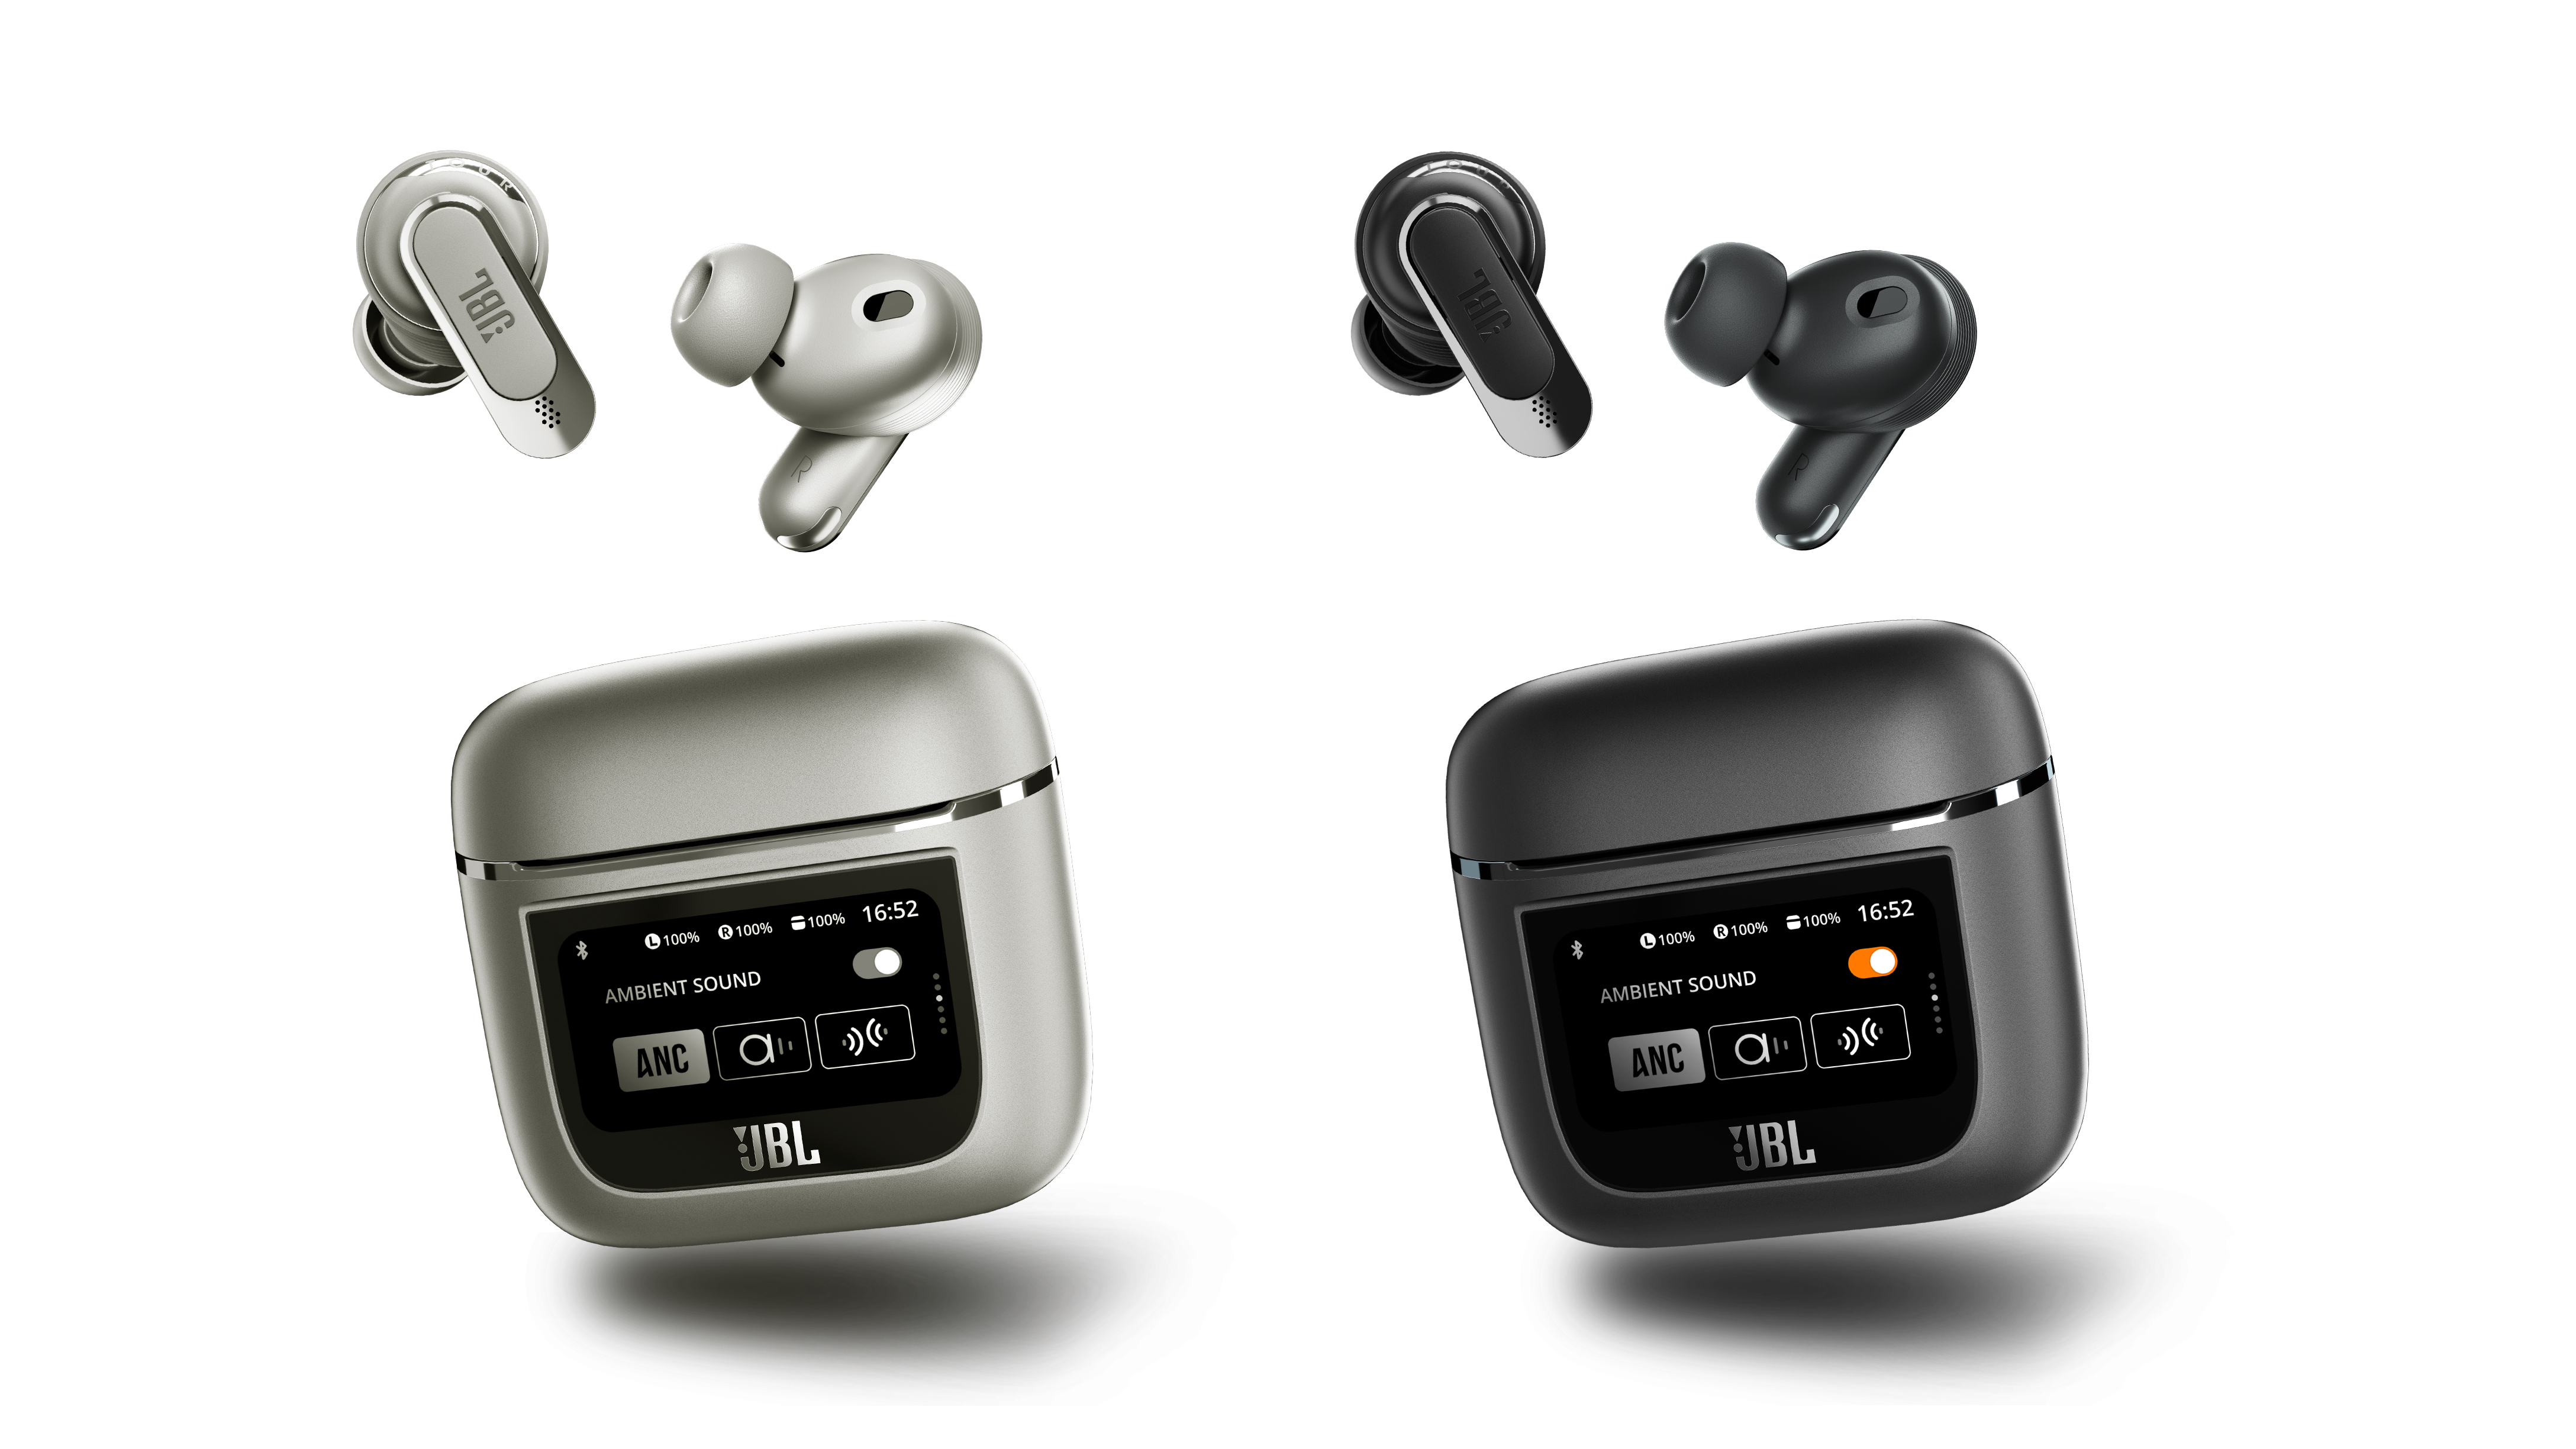 JBL's flagship Tour PRO 2 wireless earbuds have the world's first